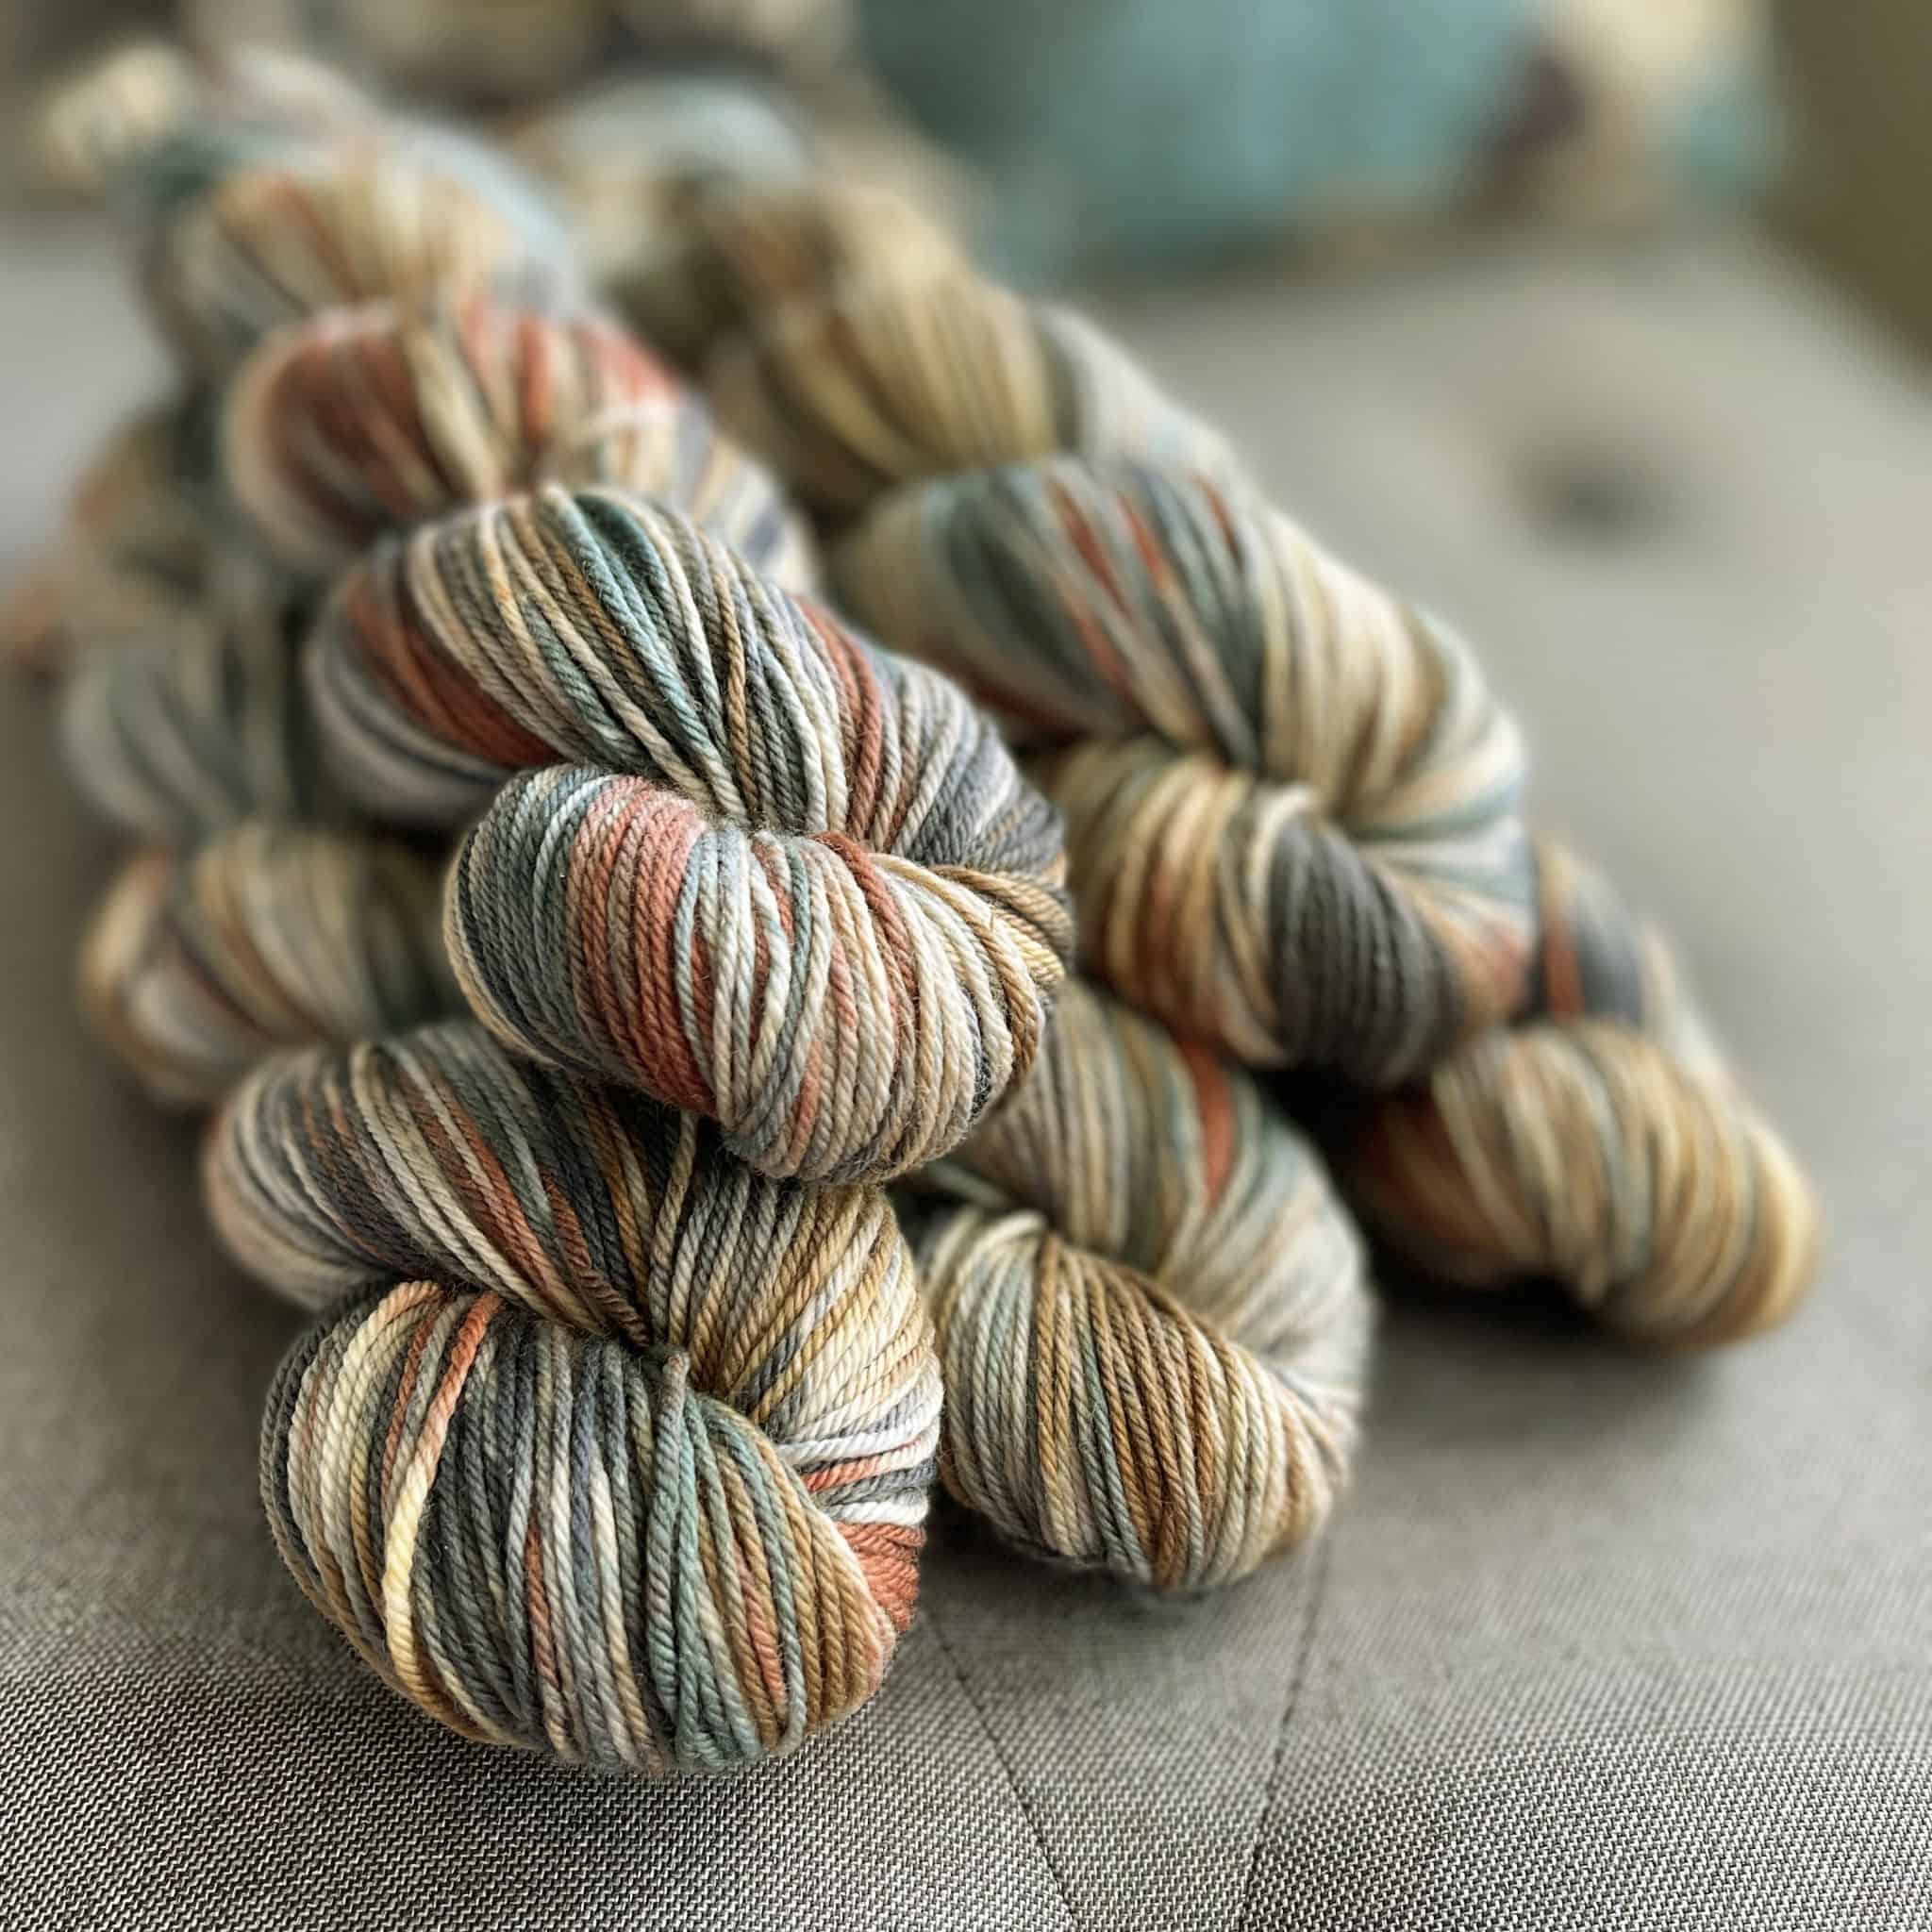 Beige yarn with red and blue.